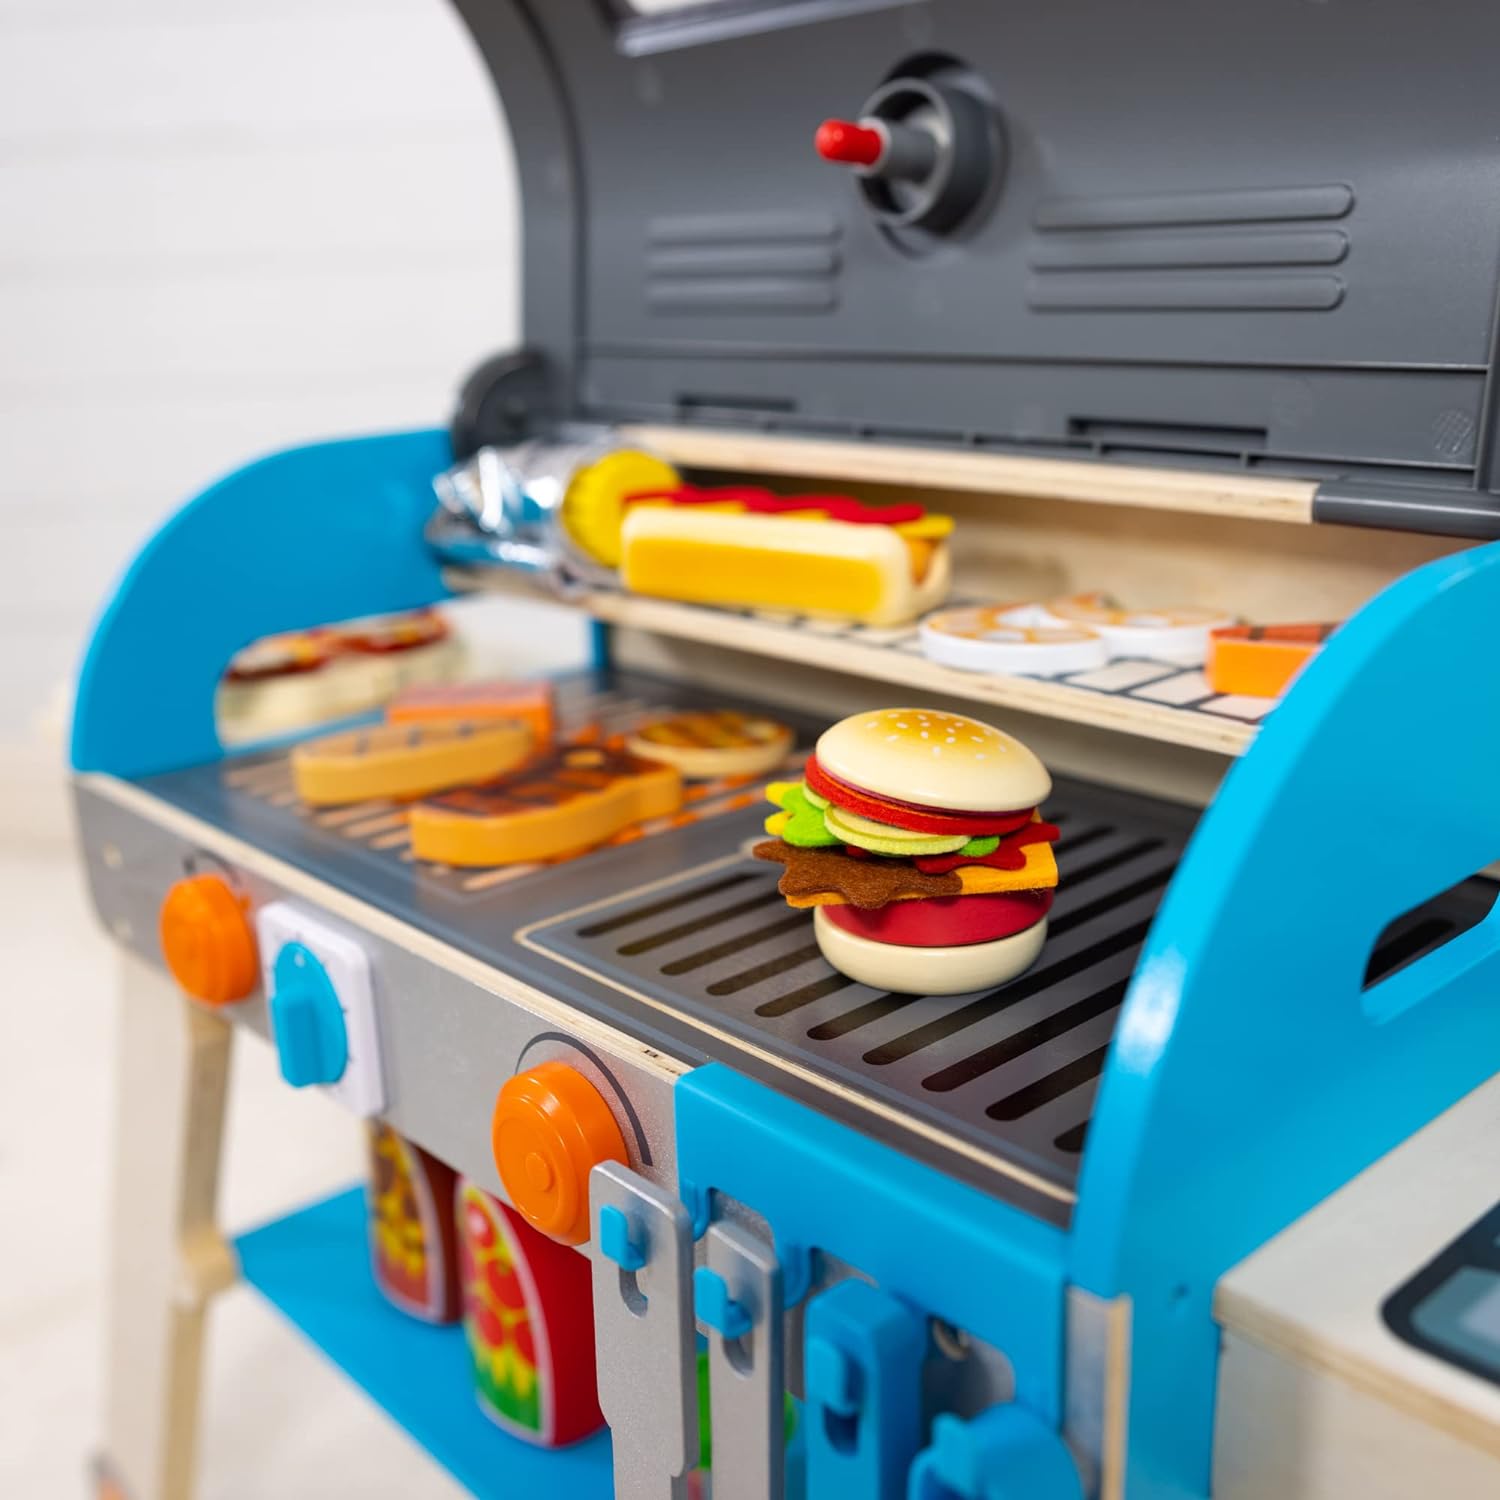 https://bigbigmart.com/wp-content/uploads/2023/11/Melissa-Doug-Wooden-Deluxe-Barbecue-Grill-Smoker-and-Pizza-Oven-Play-Food-Toy-for-Pretend-Play-Cooking-for-Kids3.jpg